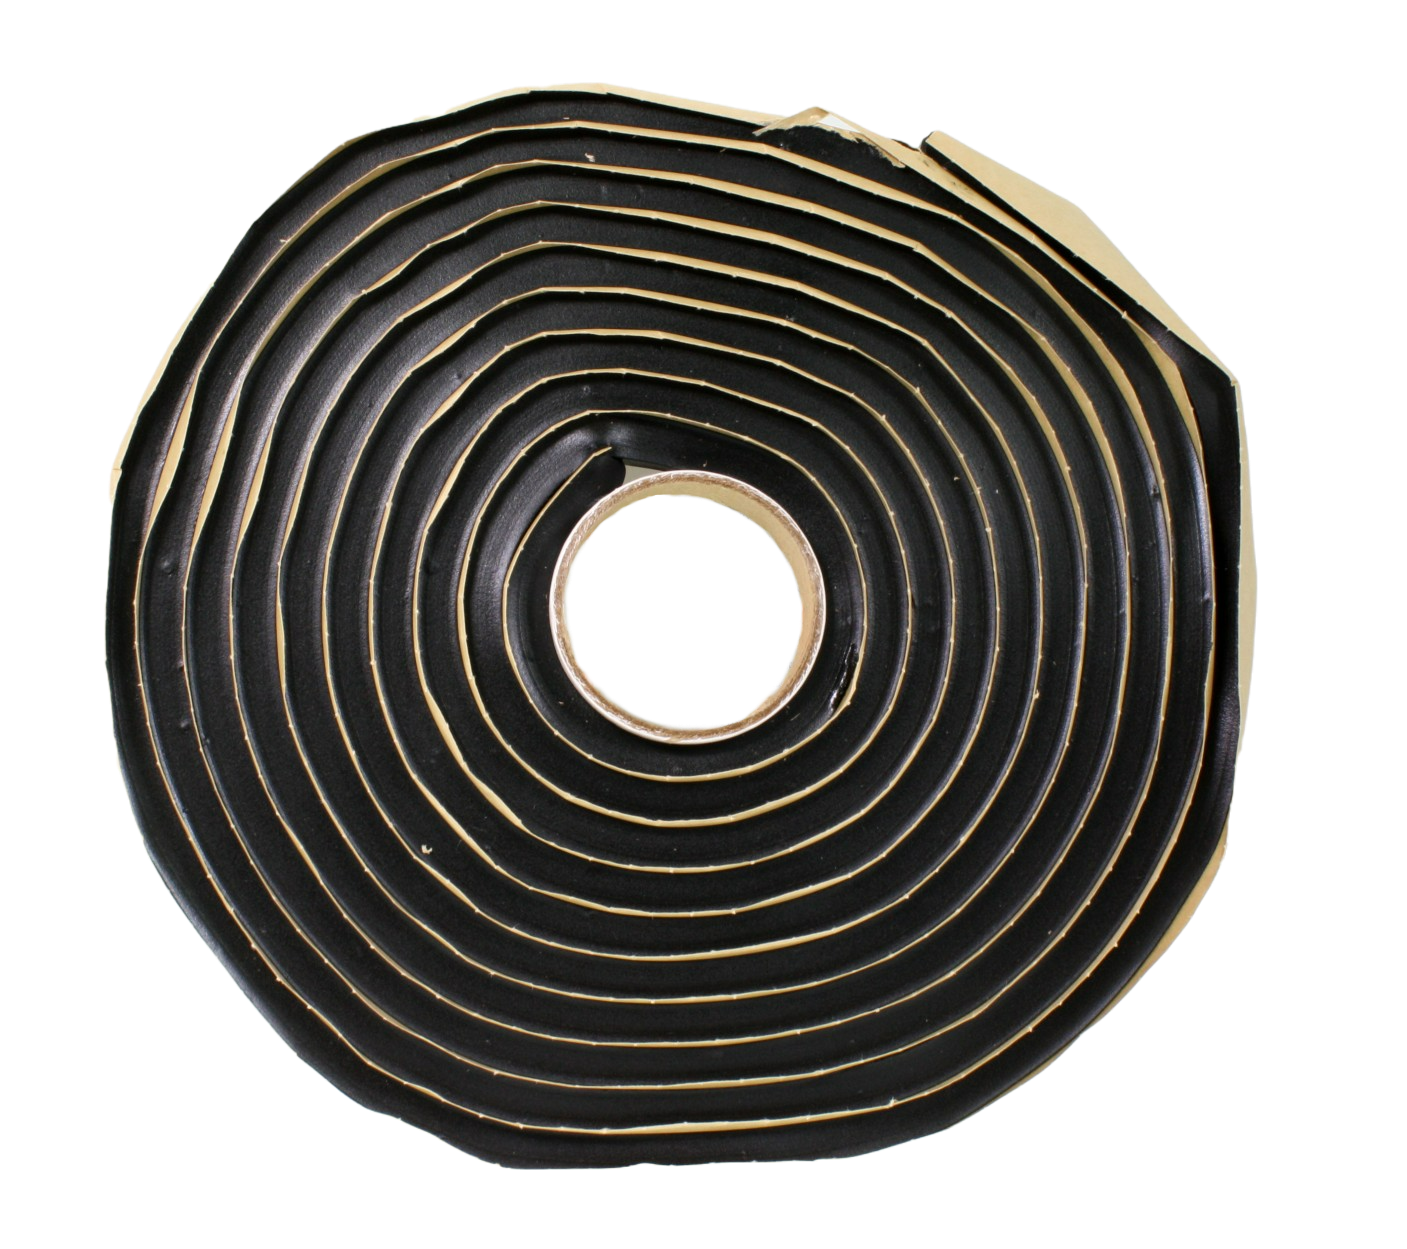 A coil of Butyl tape